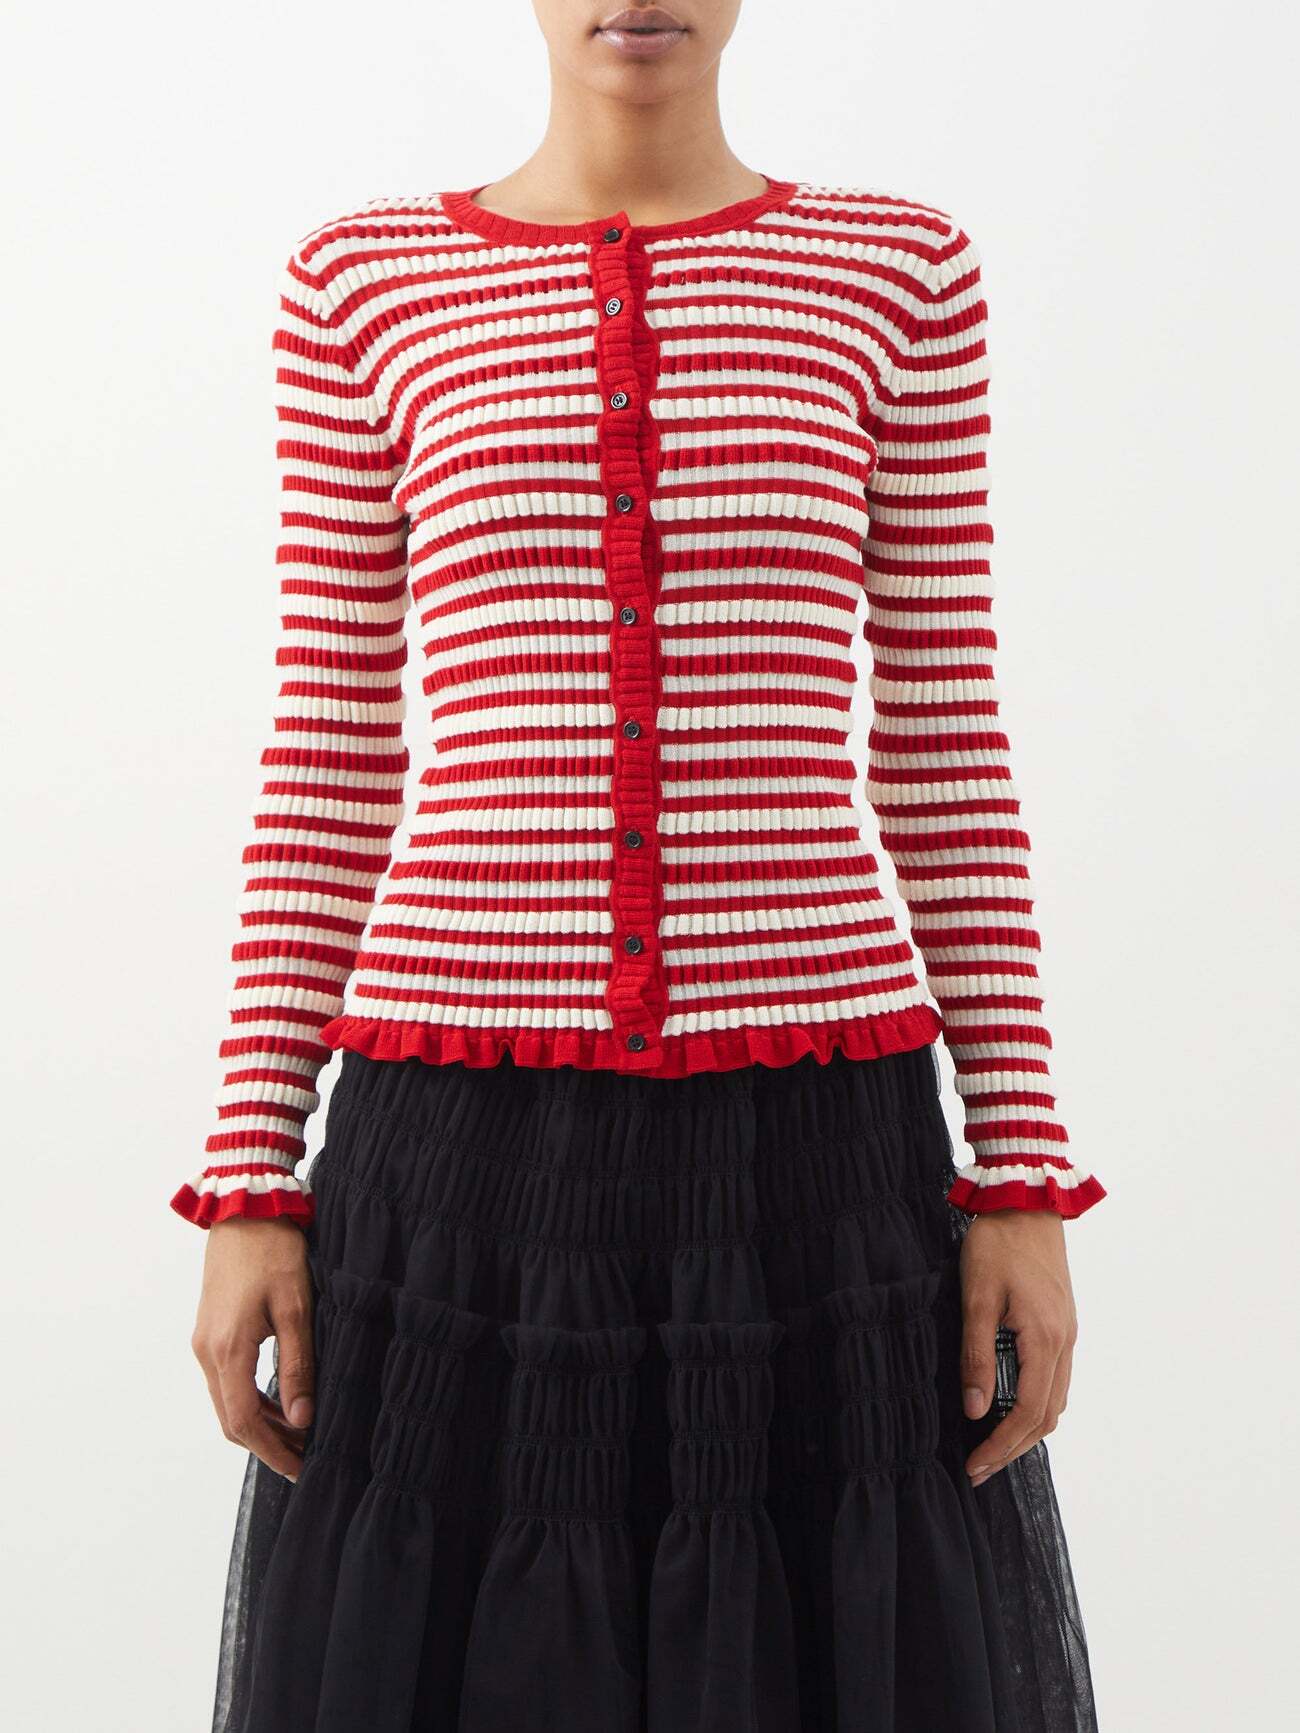 Molly Goddard - Stacey Striped Cotton-blend Cardigan - Womens - Red Cream